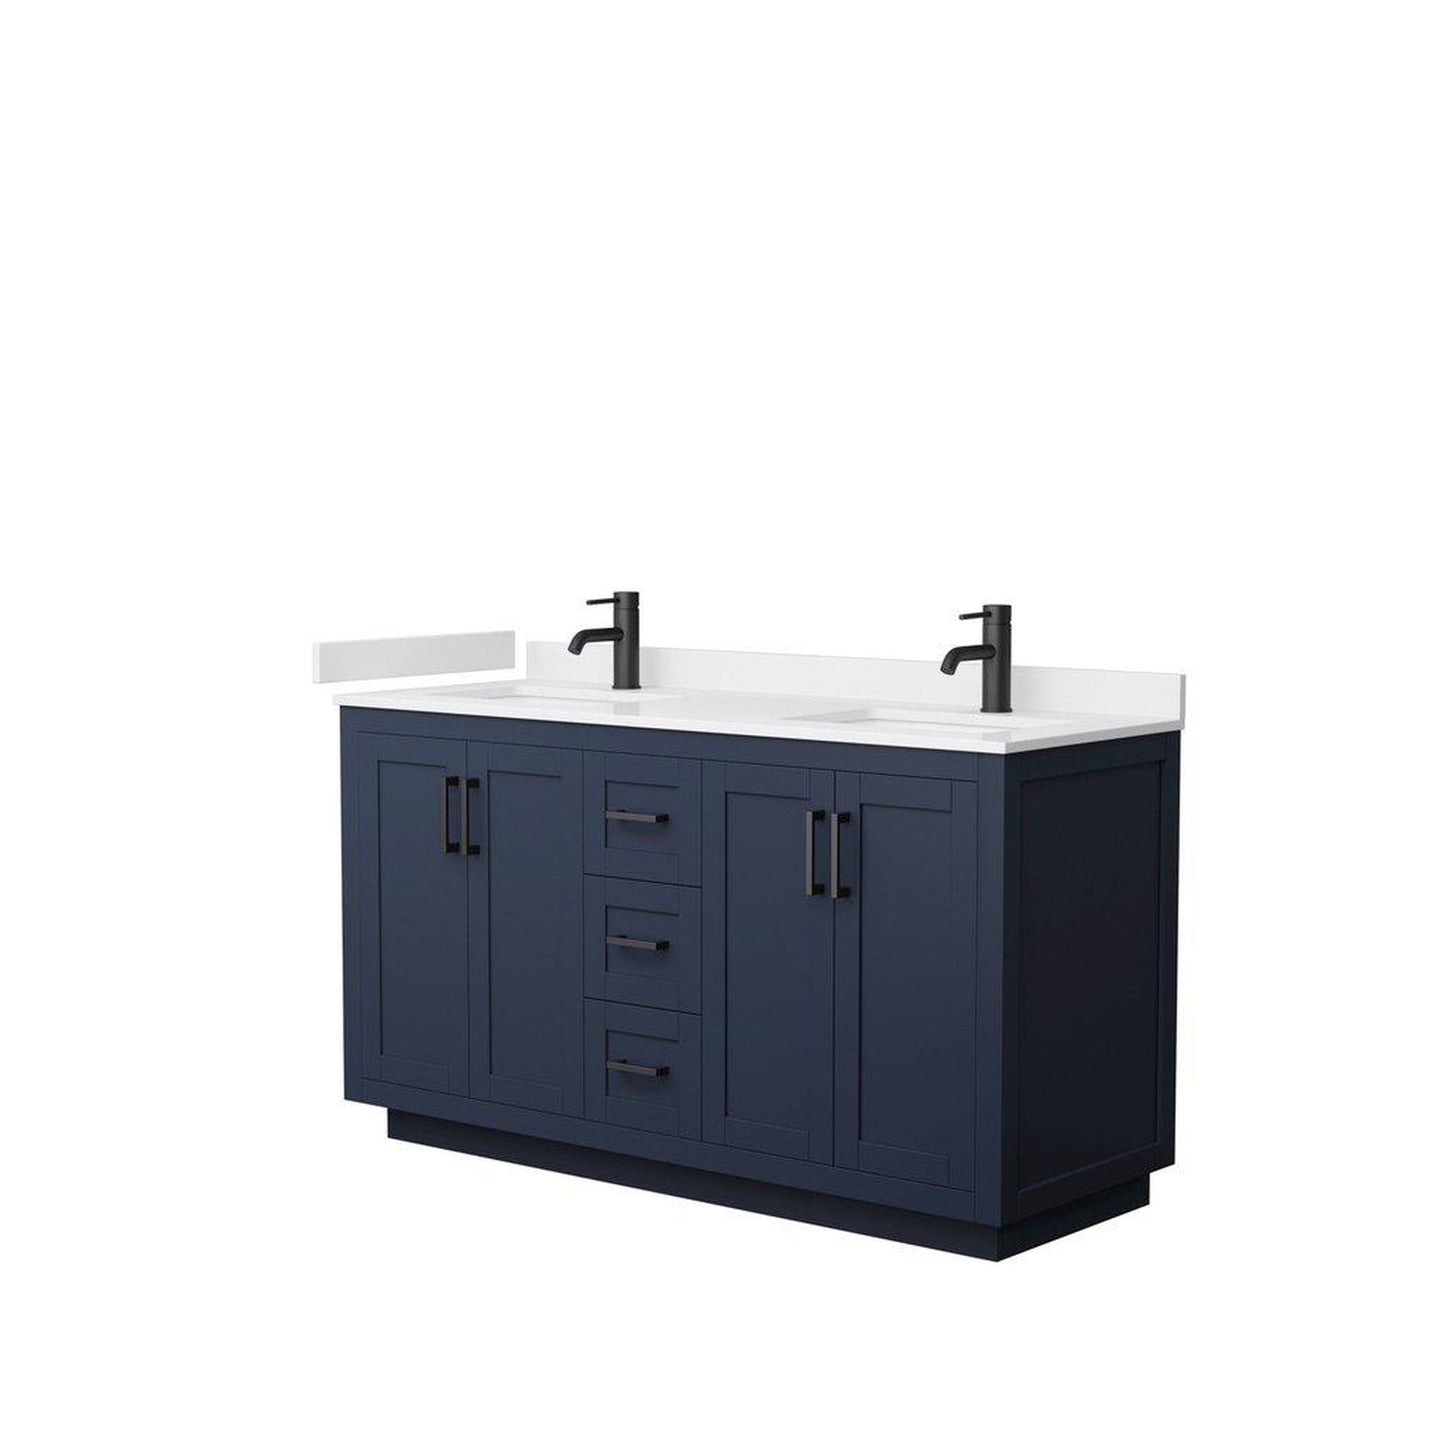 Wyndham Collection Miranda 60" Double Bathroom Dark Blue Vanity Set With White Cultured Marble Countertop, Undermount Square Sink, And Matte Black Trim